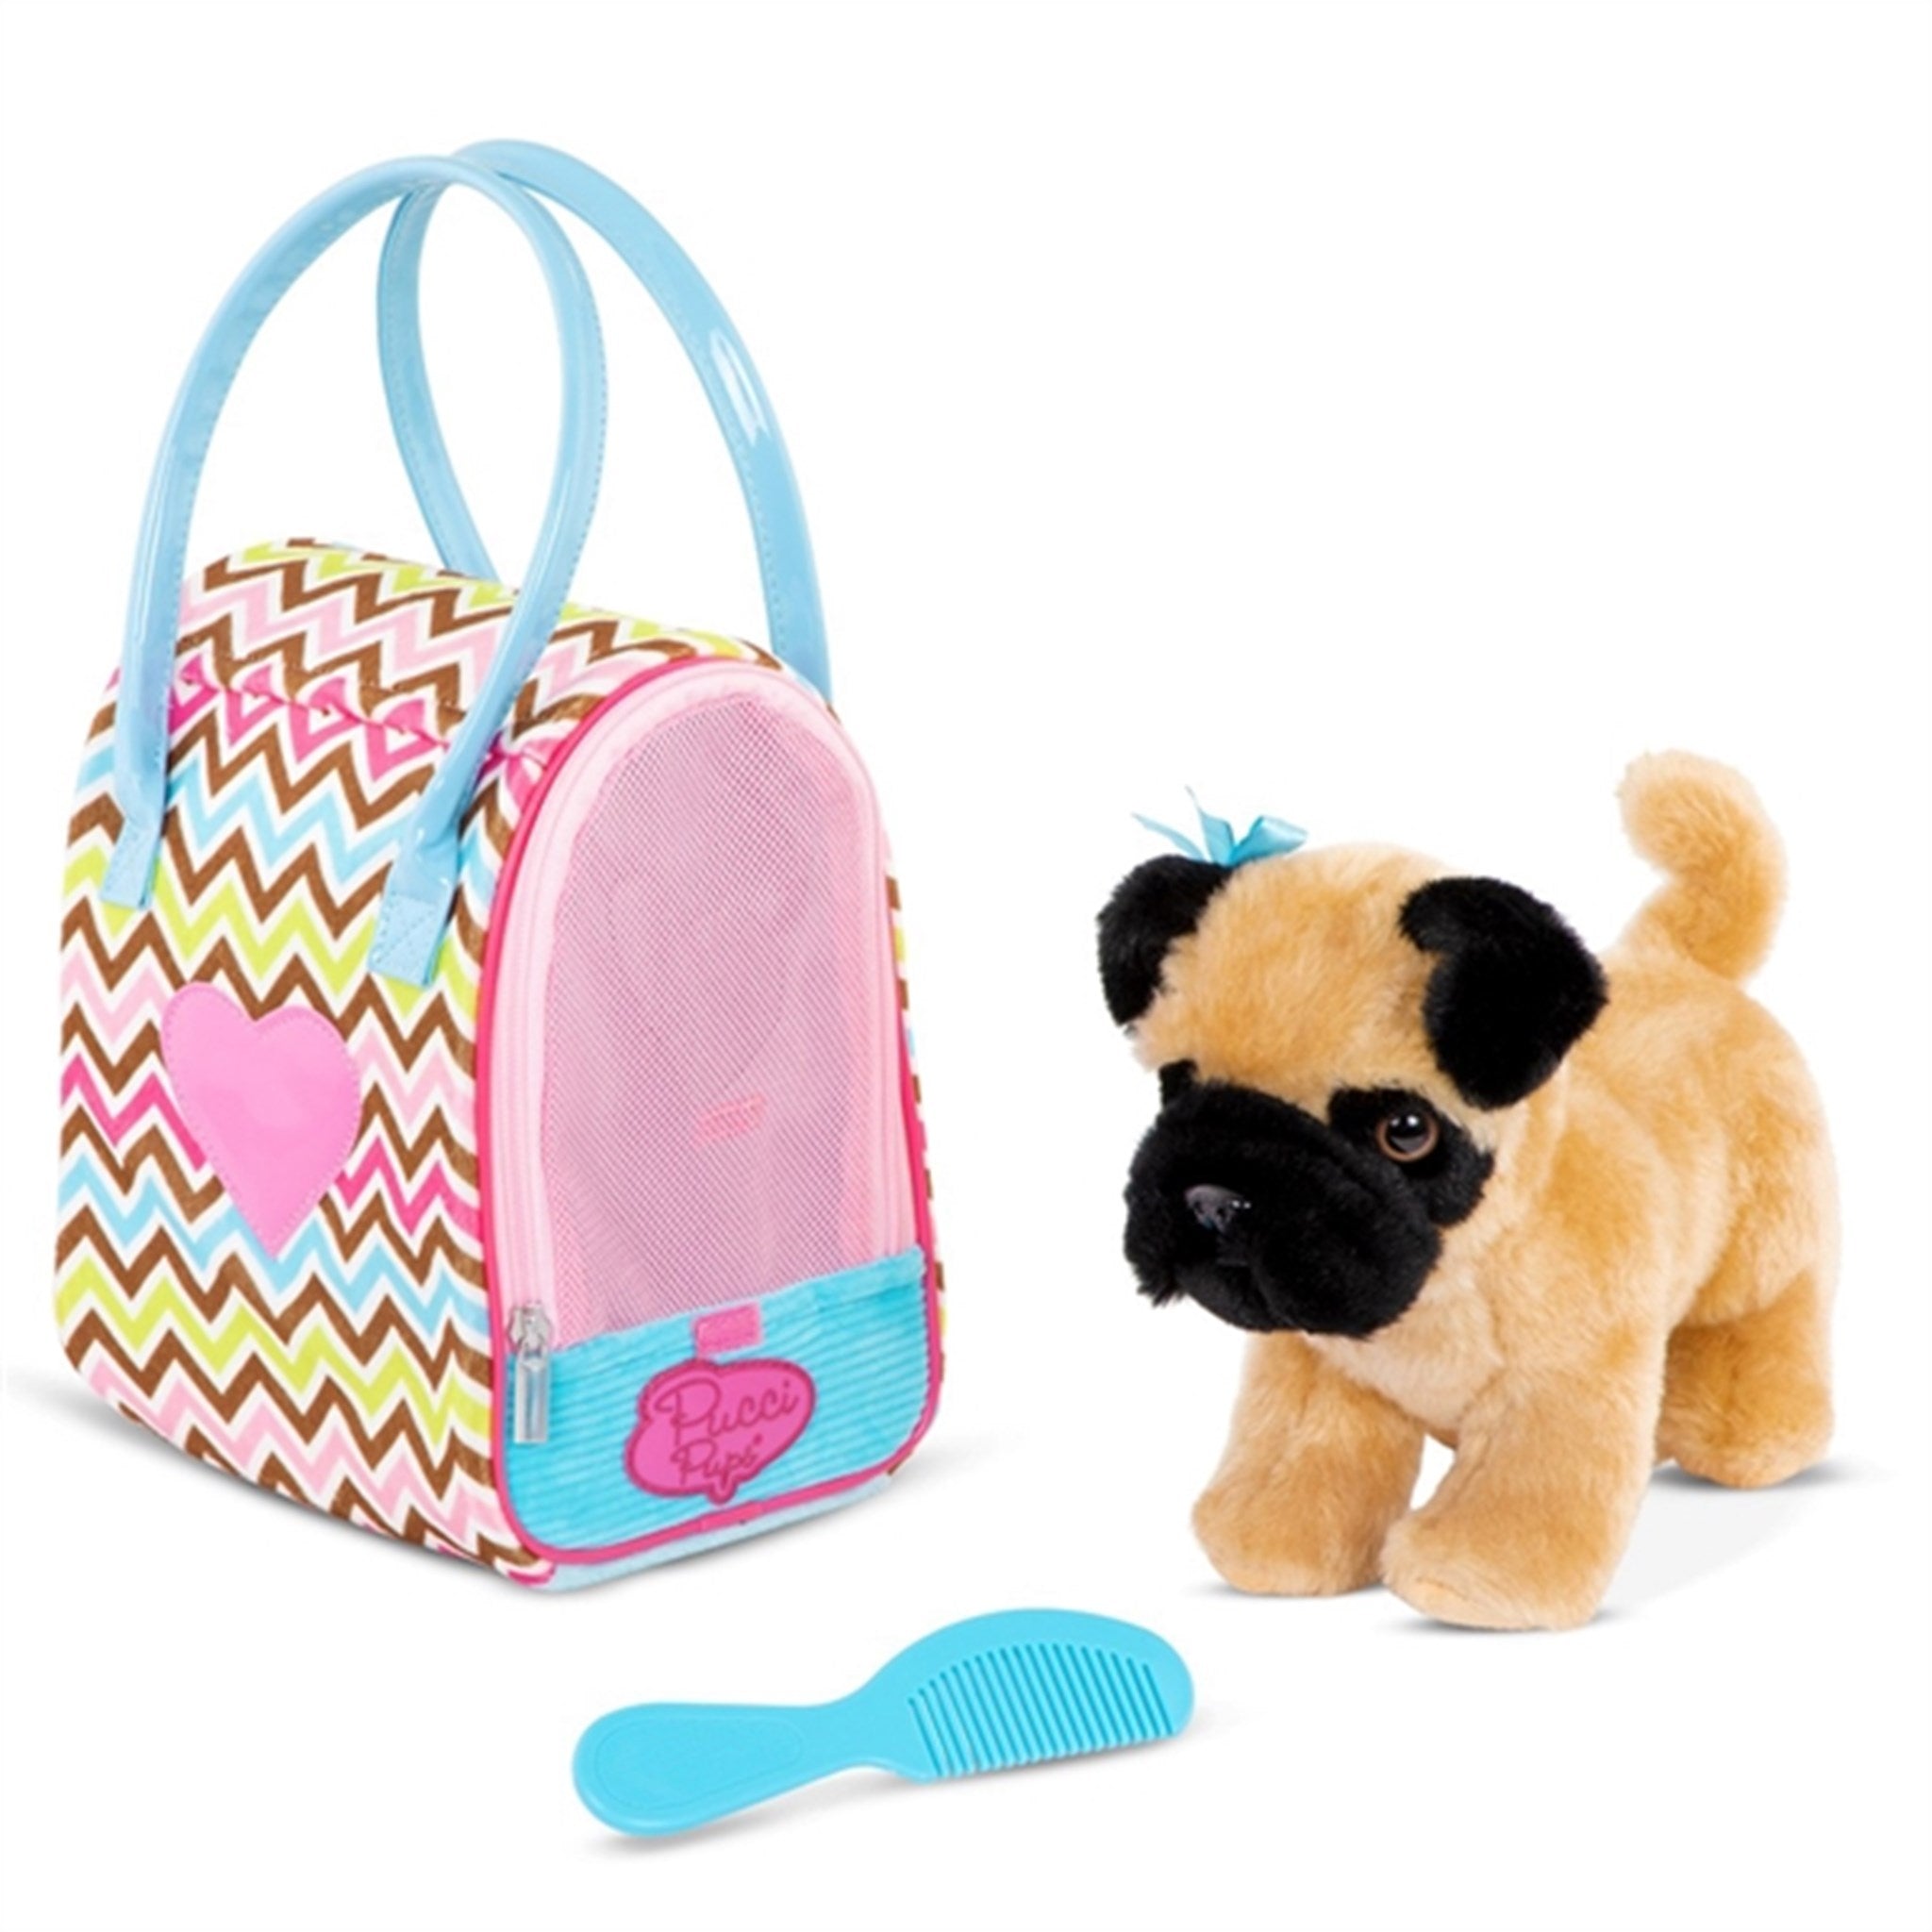 Pucci Pups Dog in Bag Zig Zag